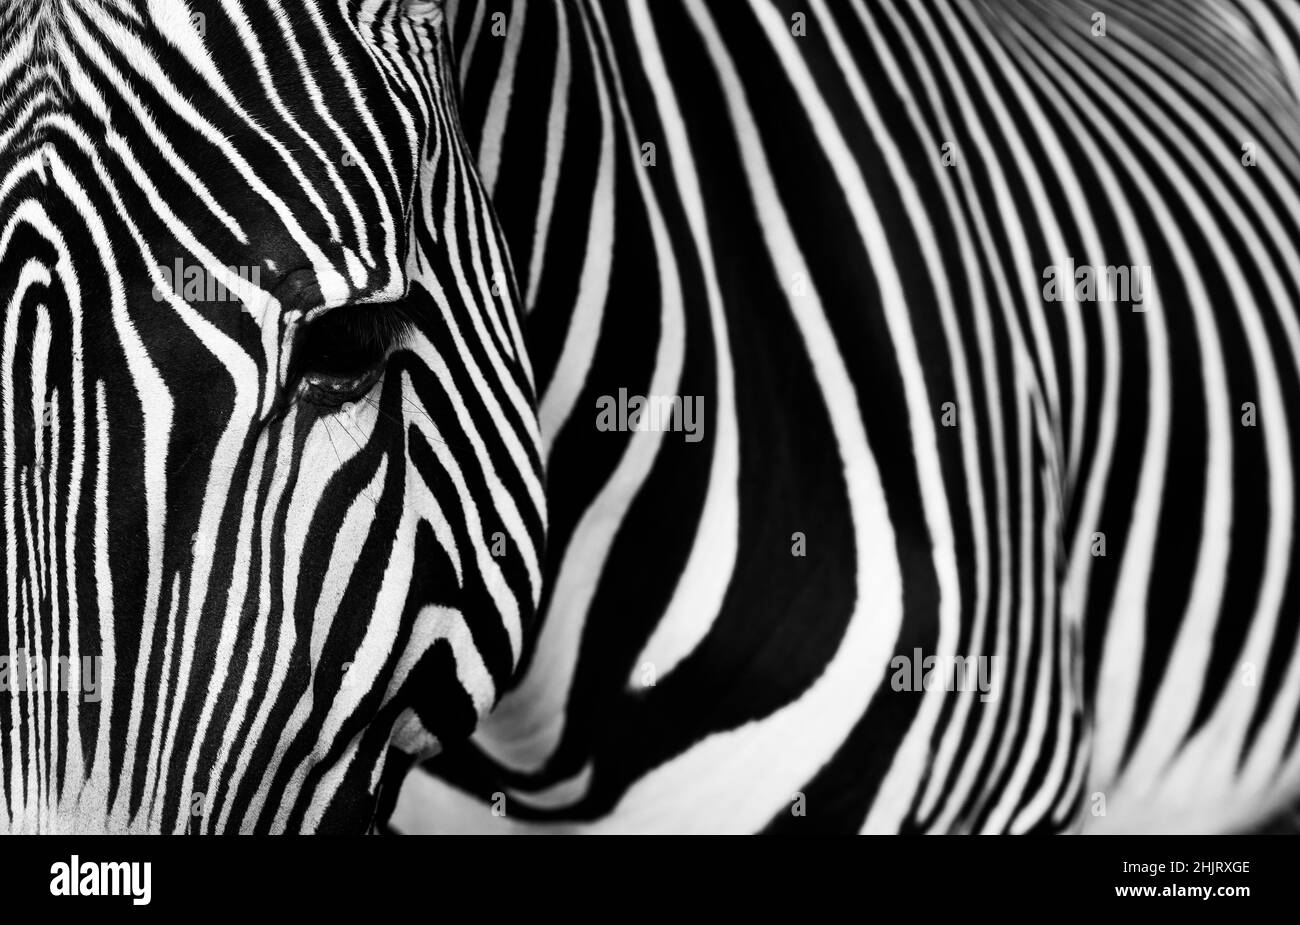 Zebra detail with its typical stripes. Close-up Portrait of Zebra. Photo in black and white. Stock Photo